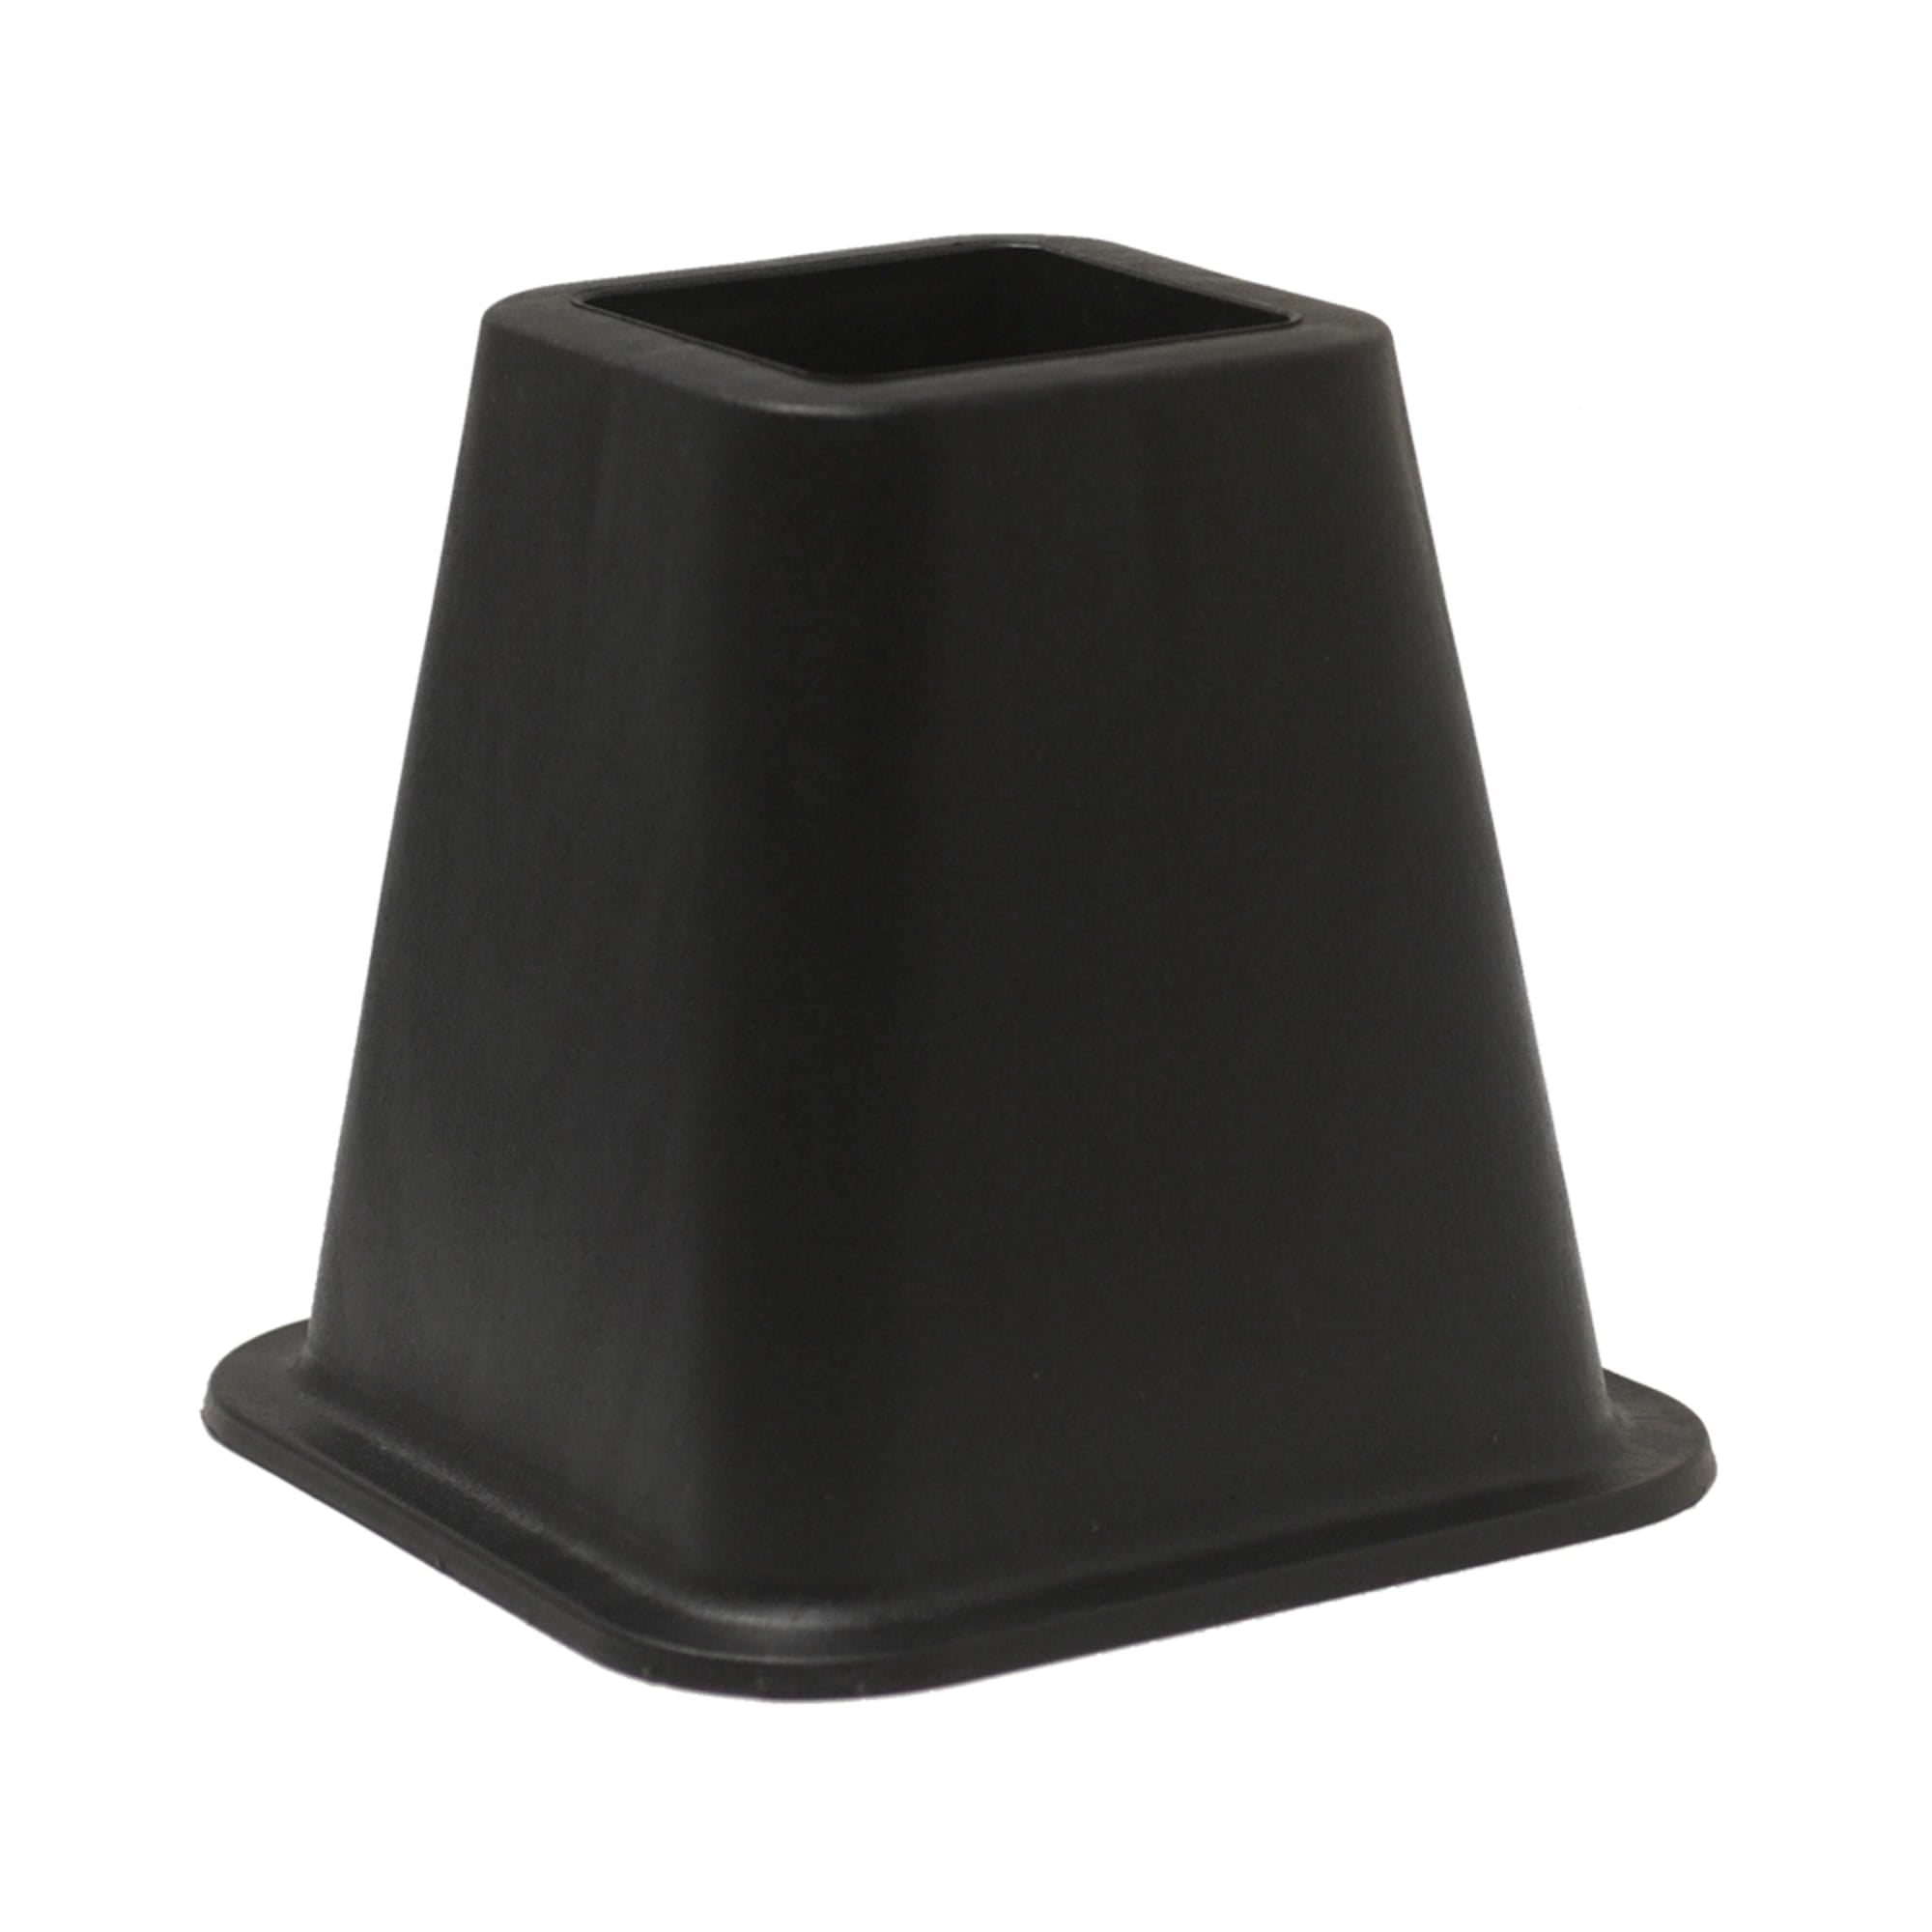 Home Basics 4 Piece Plastic Bed Risers, Black $6.00 EACH, CASE PACK OF 12